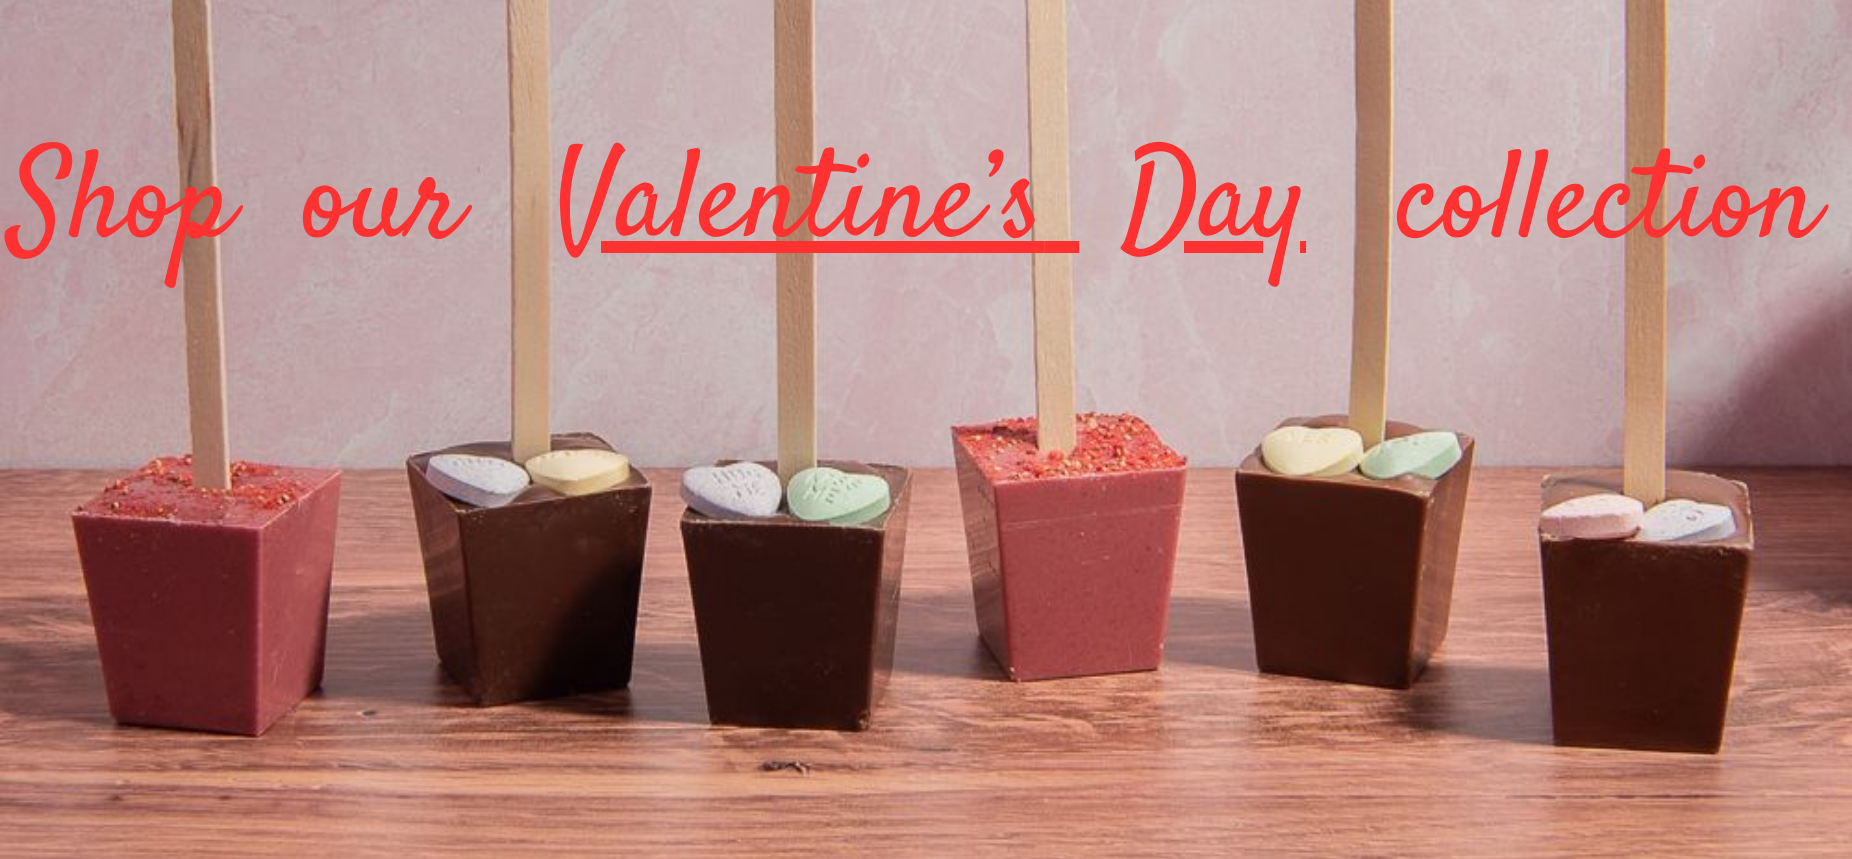 Celebrate with Galentine’s Day Chocolate and Chick Flicks Ticket Chocolate Valentine's Day Collection